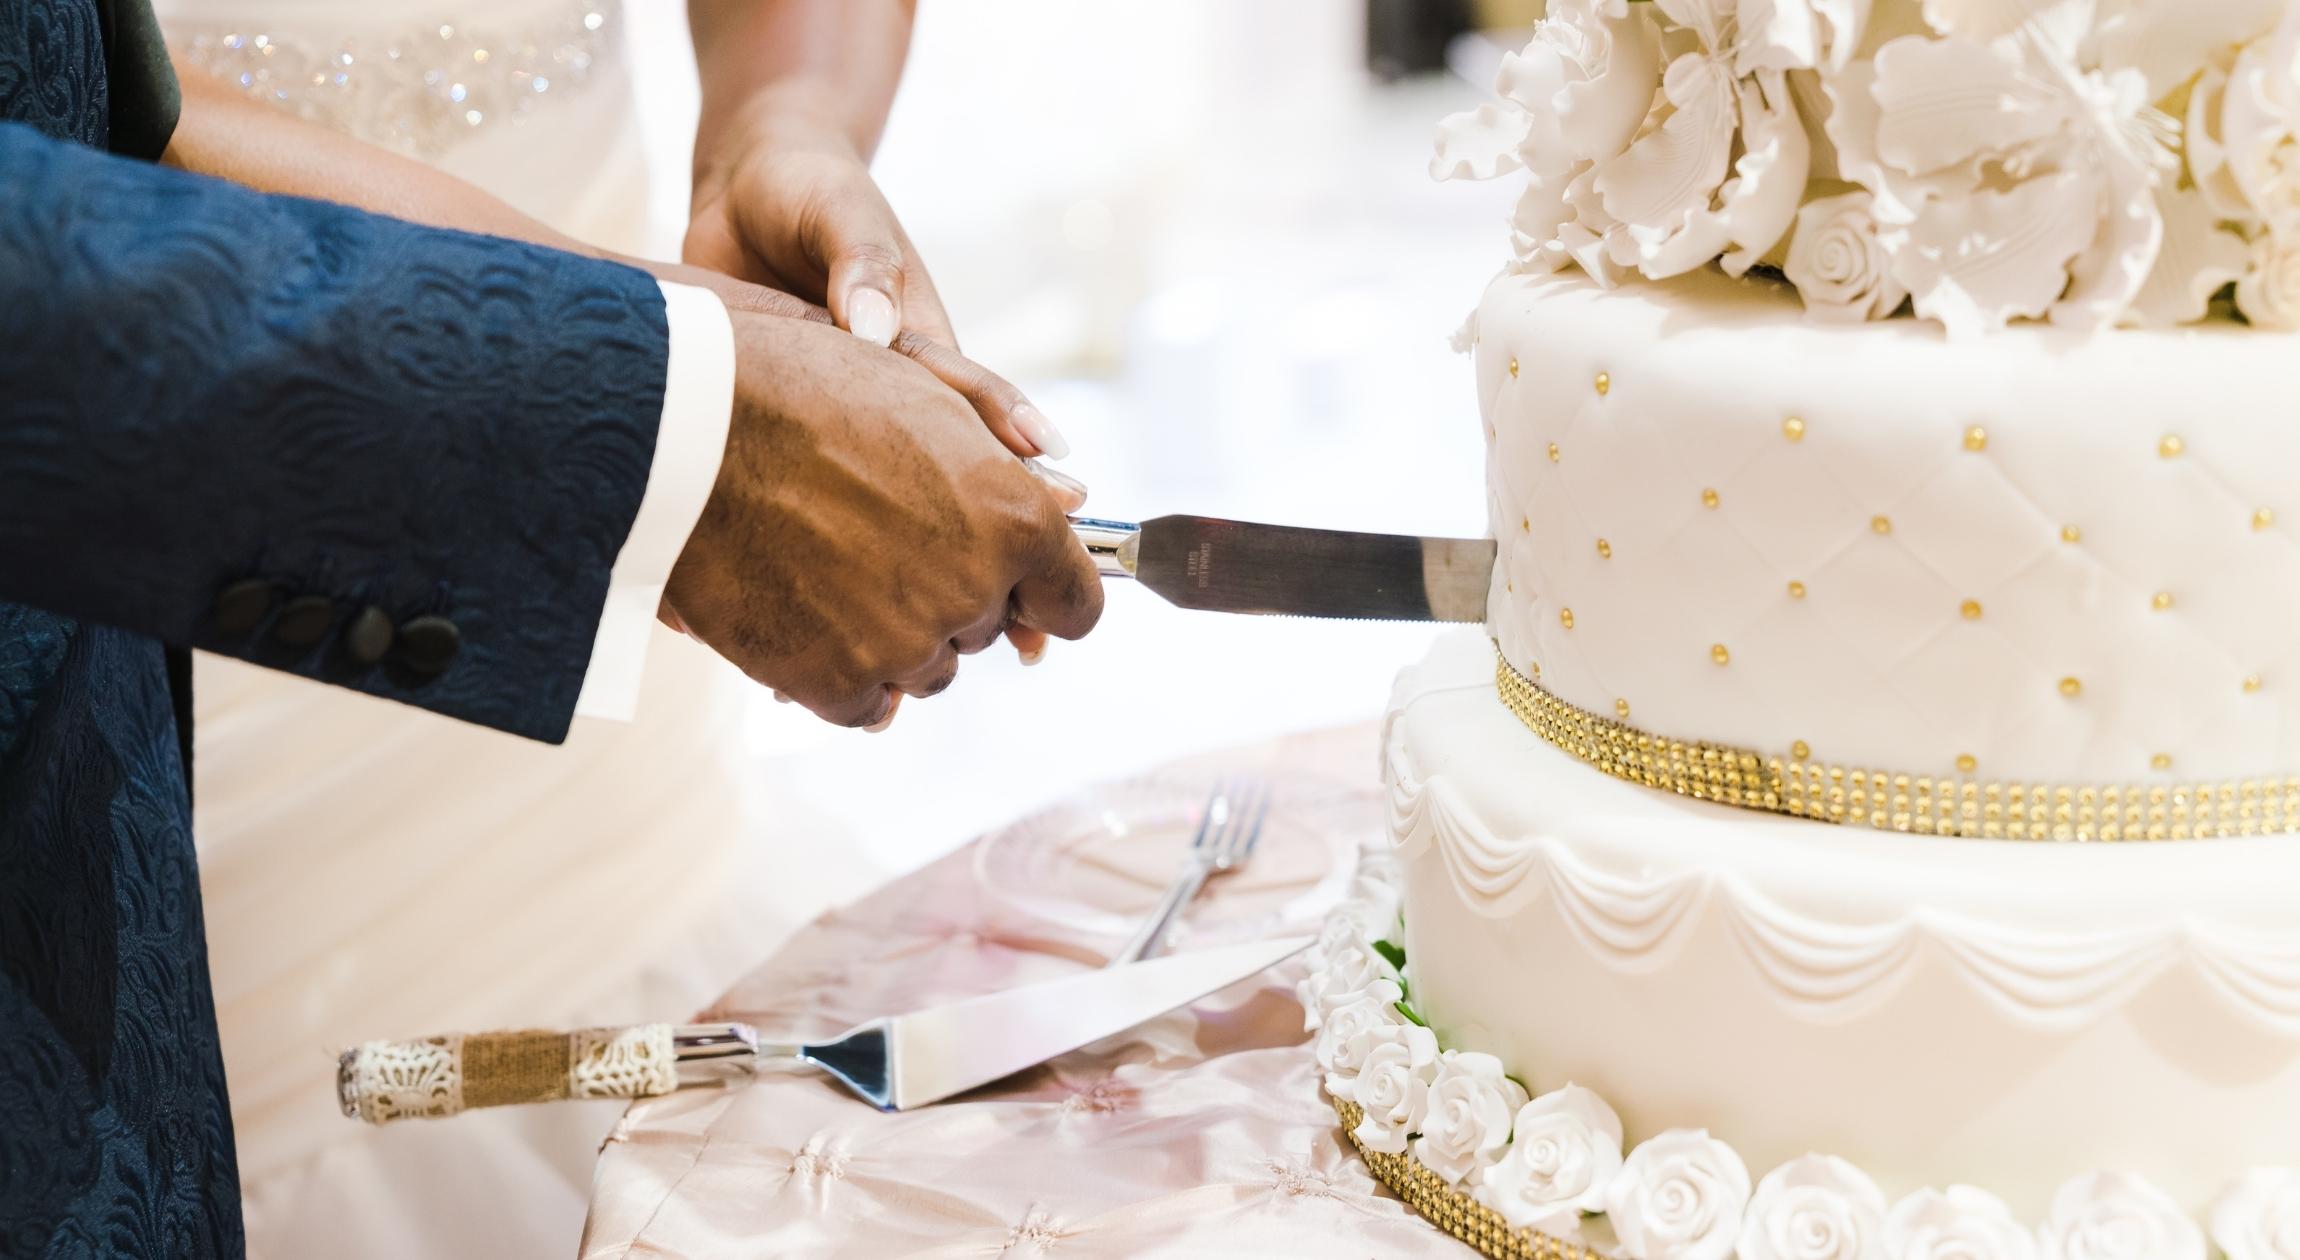 The hands of a Black couple cutting into a wedding cake